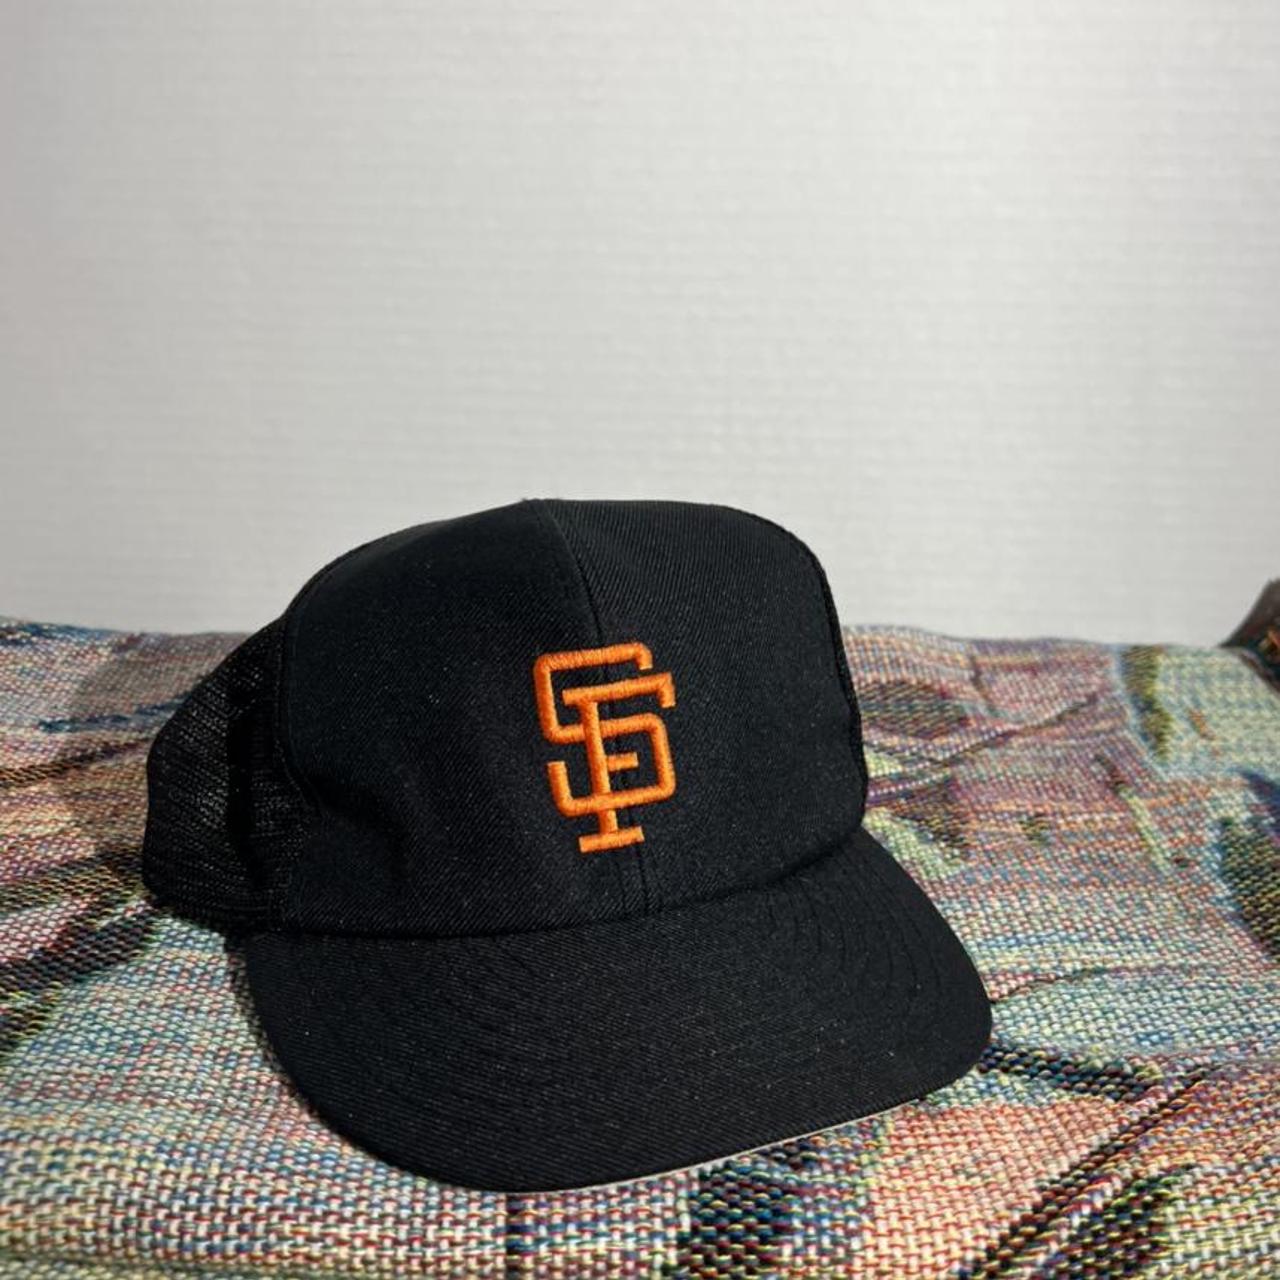 🦋90s San Fran Giants hat🧡in perfect condition, no